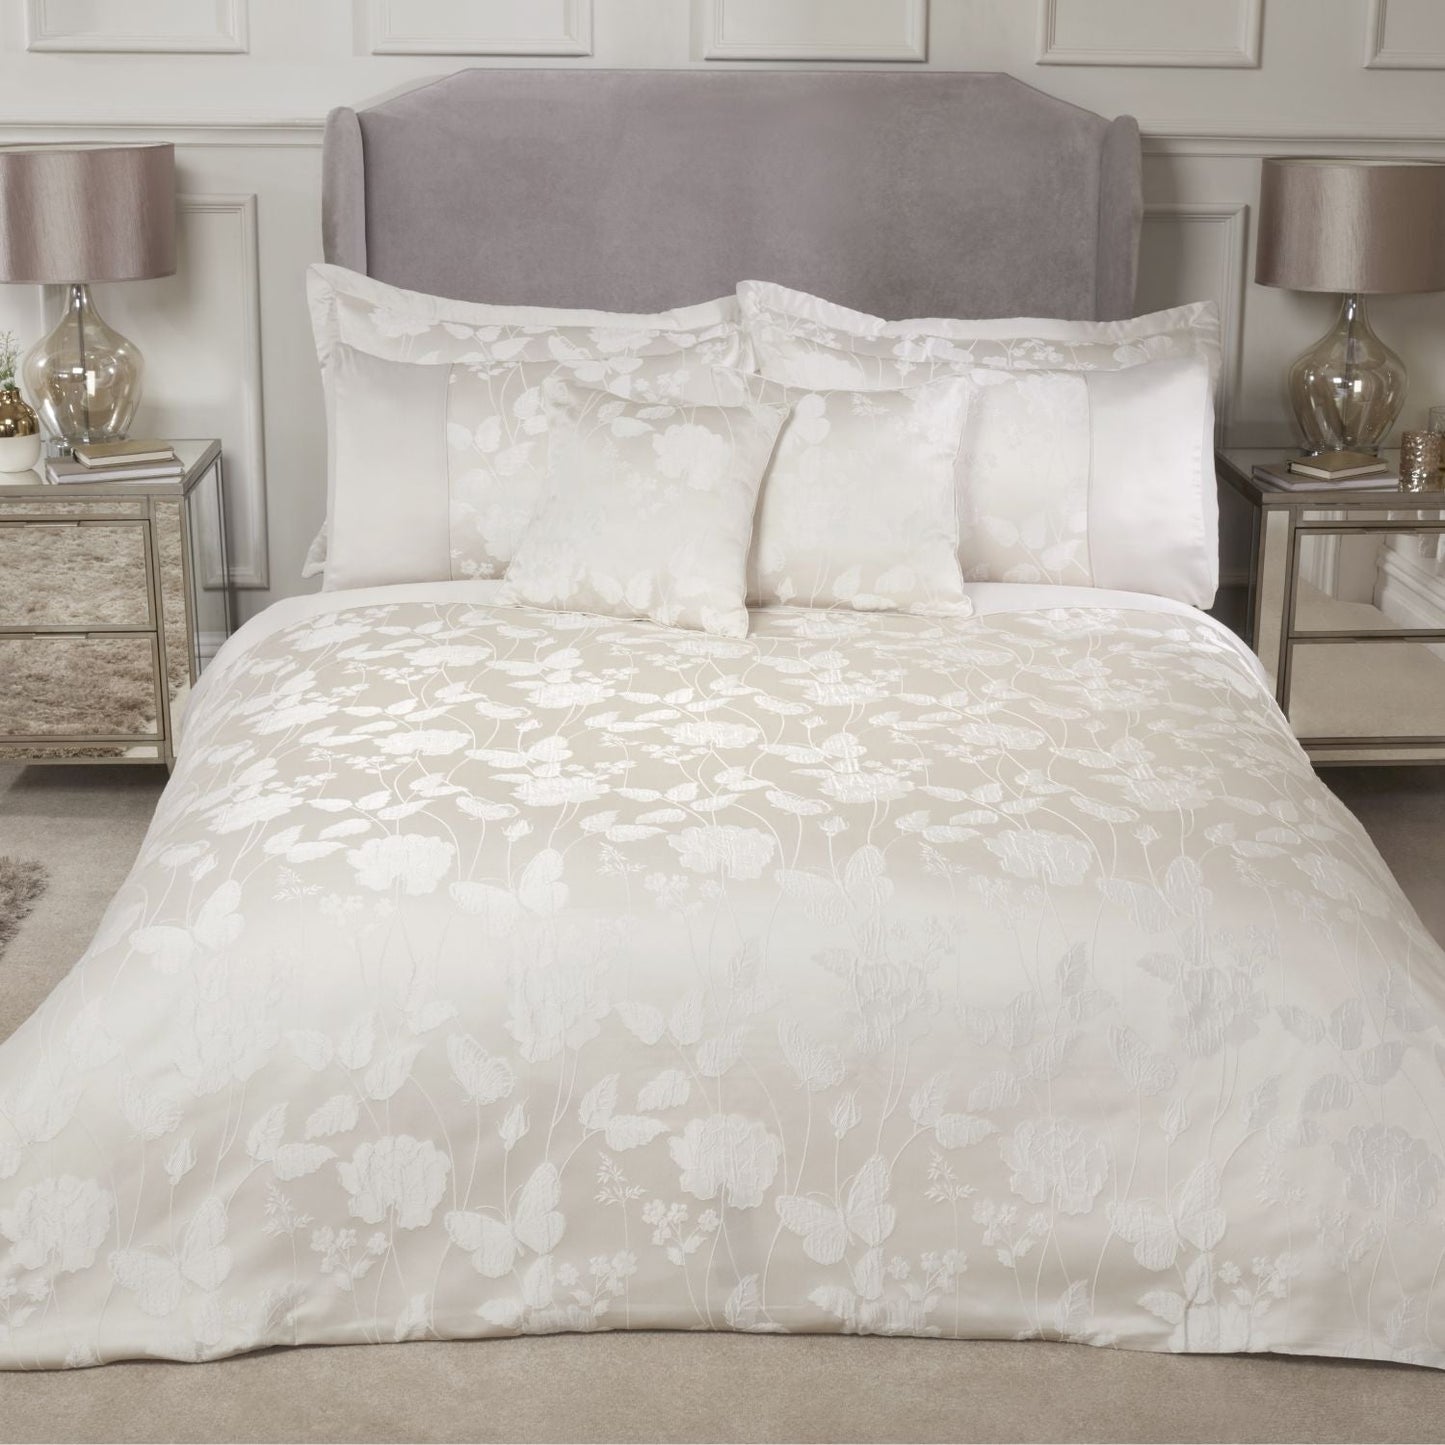 Butterfly Meadow Cream Embellished Jacquard Duvet Set